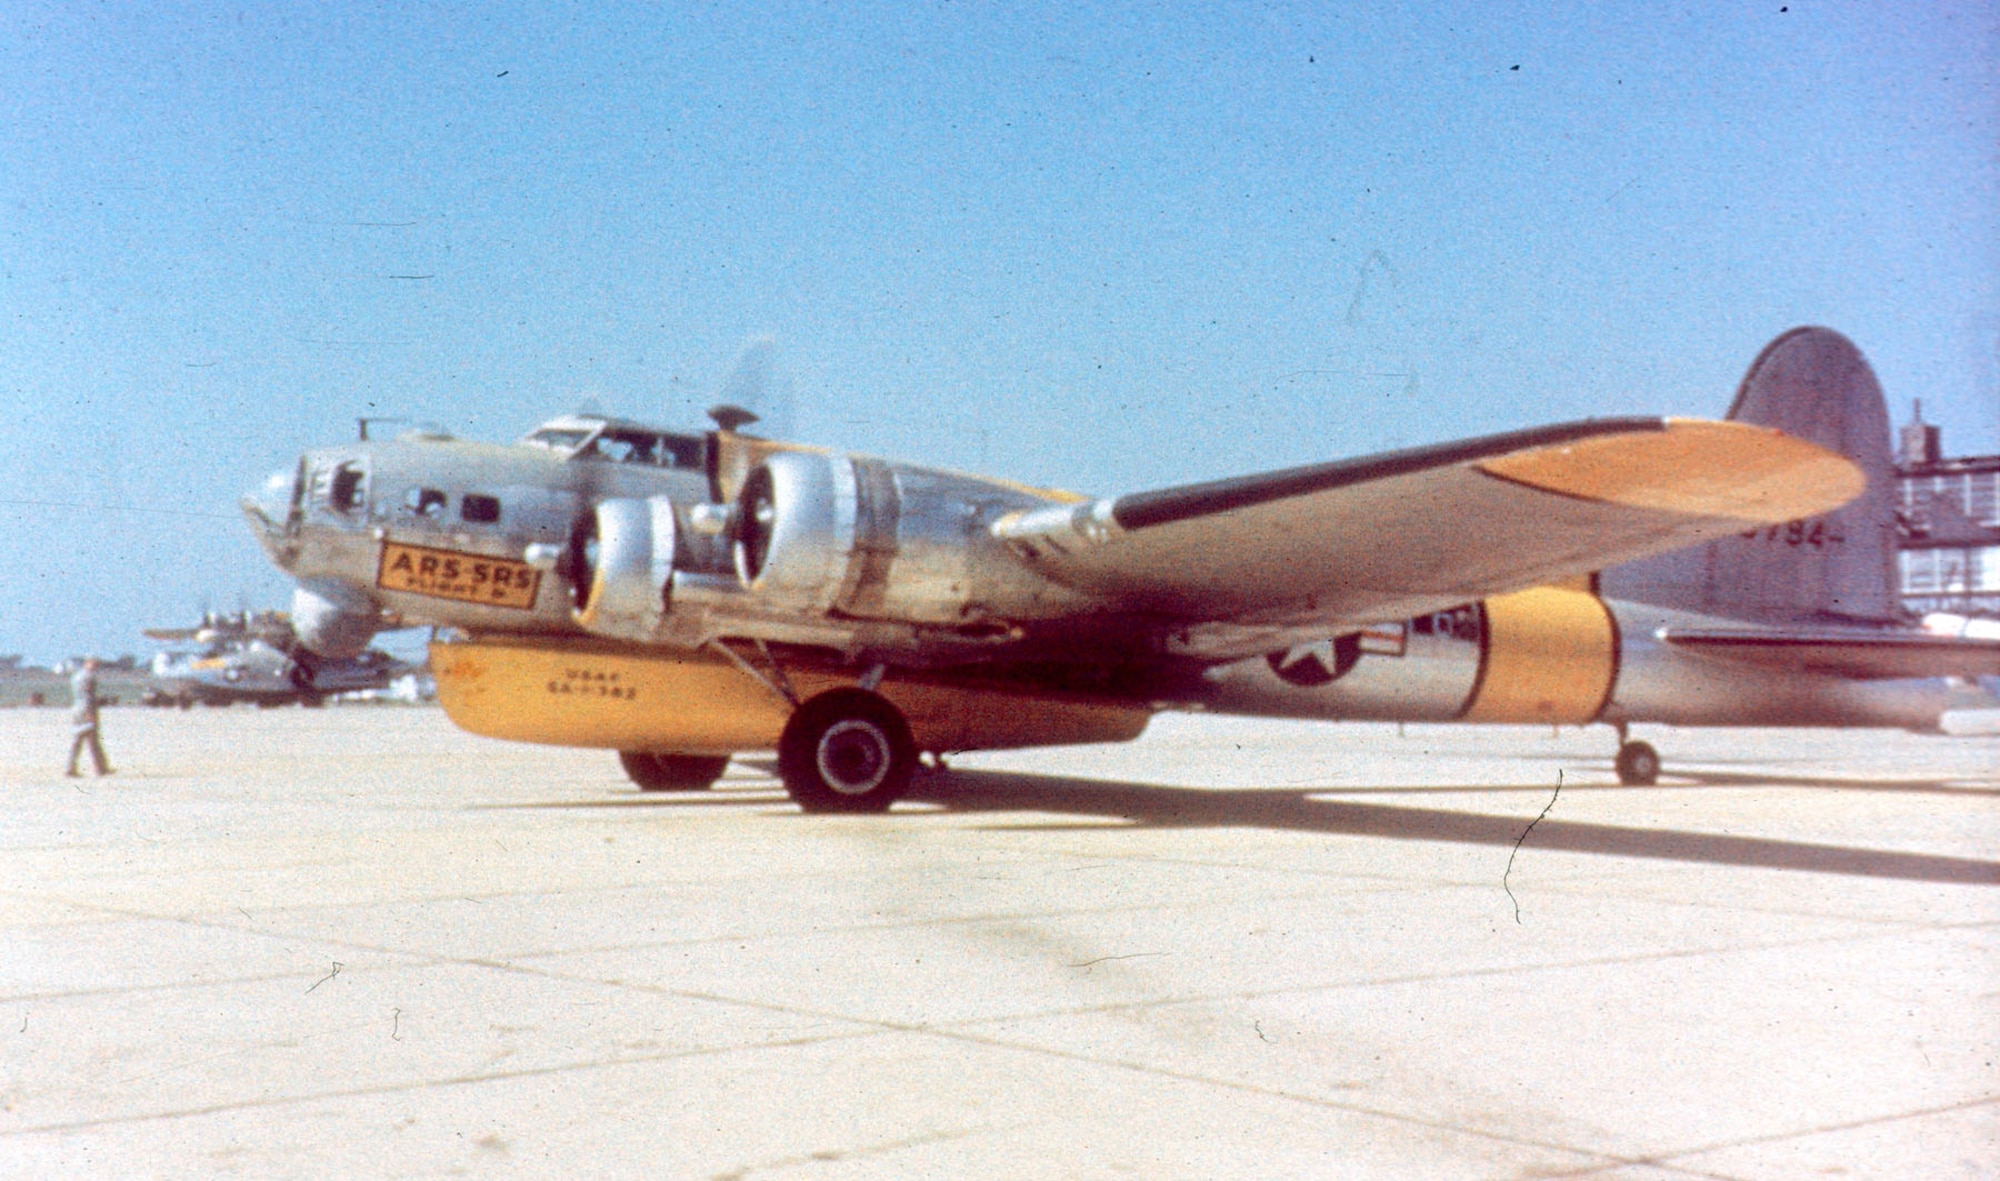 The World War II Flying Fortress soldiered on in Korea as a rescue or staff aircraft. This SB-17G painted in yellow rescue markings was equipped with a droppable lifeboat. (U.S. Air Force photo)